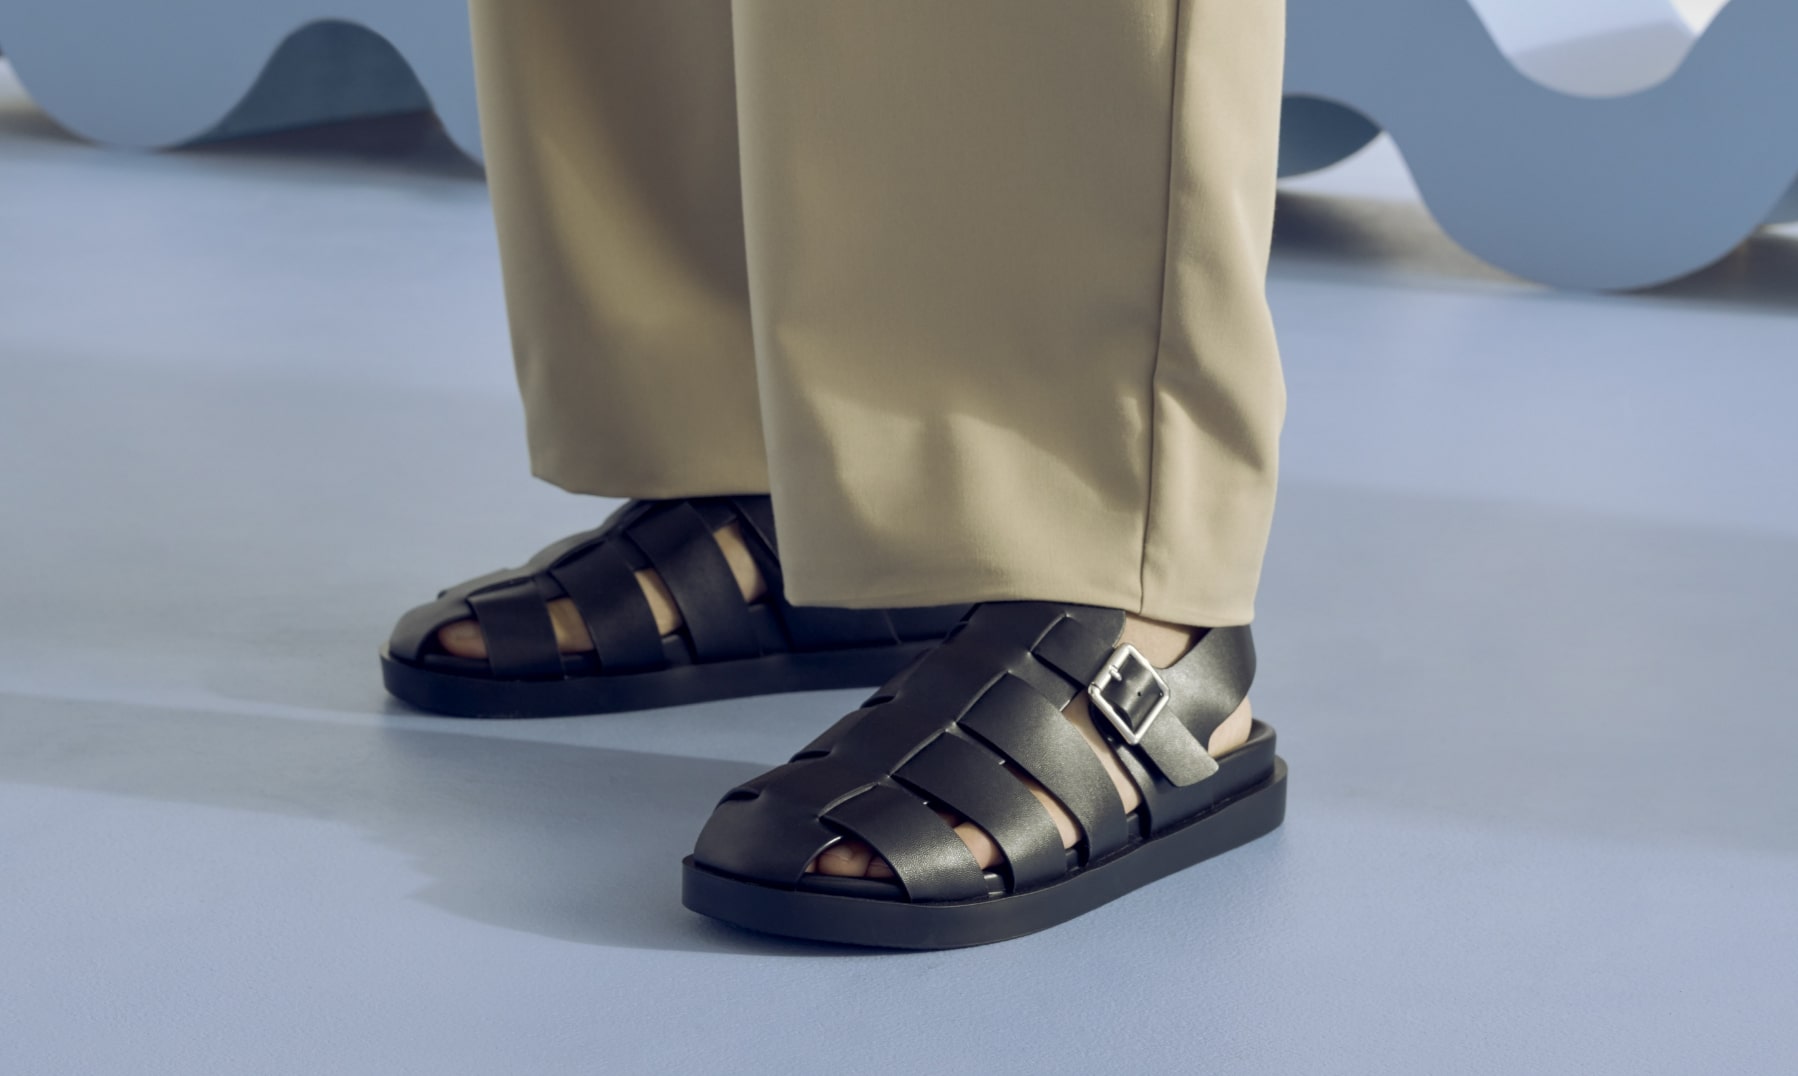 Stacy Adams sandals featuring the Montego in black on a light blue floor.